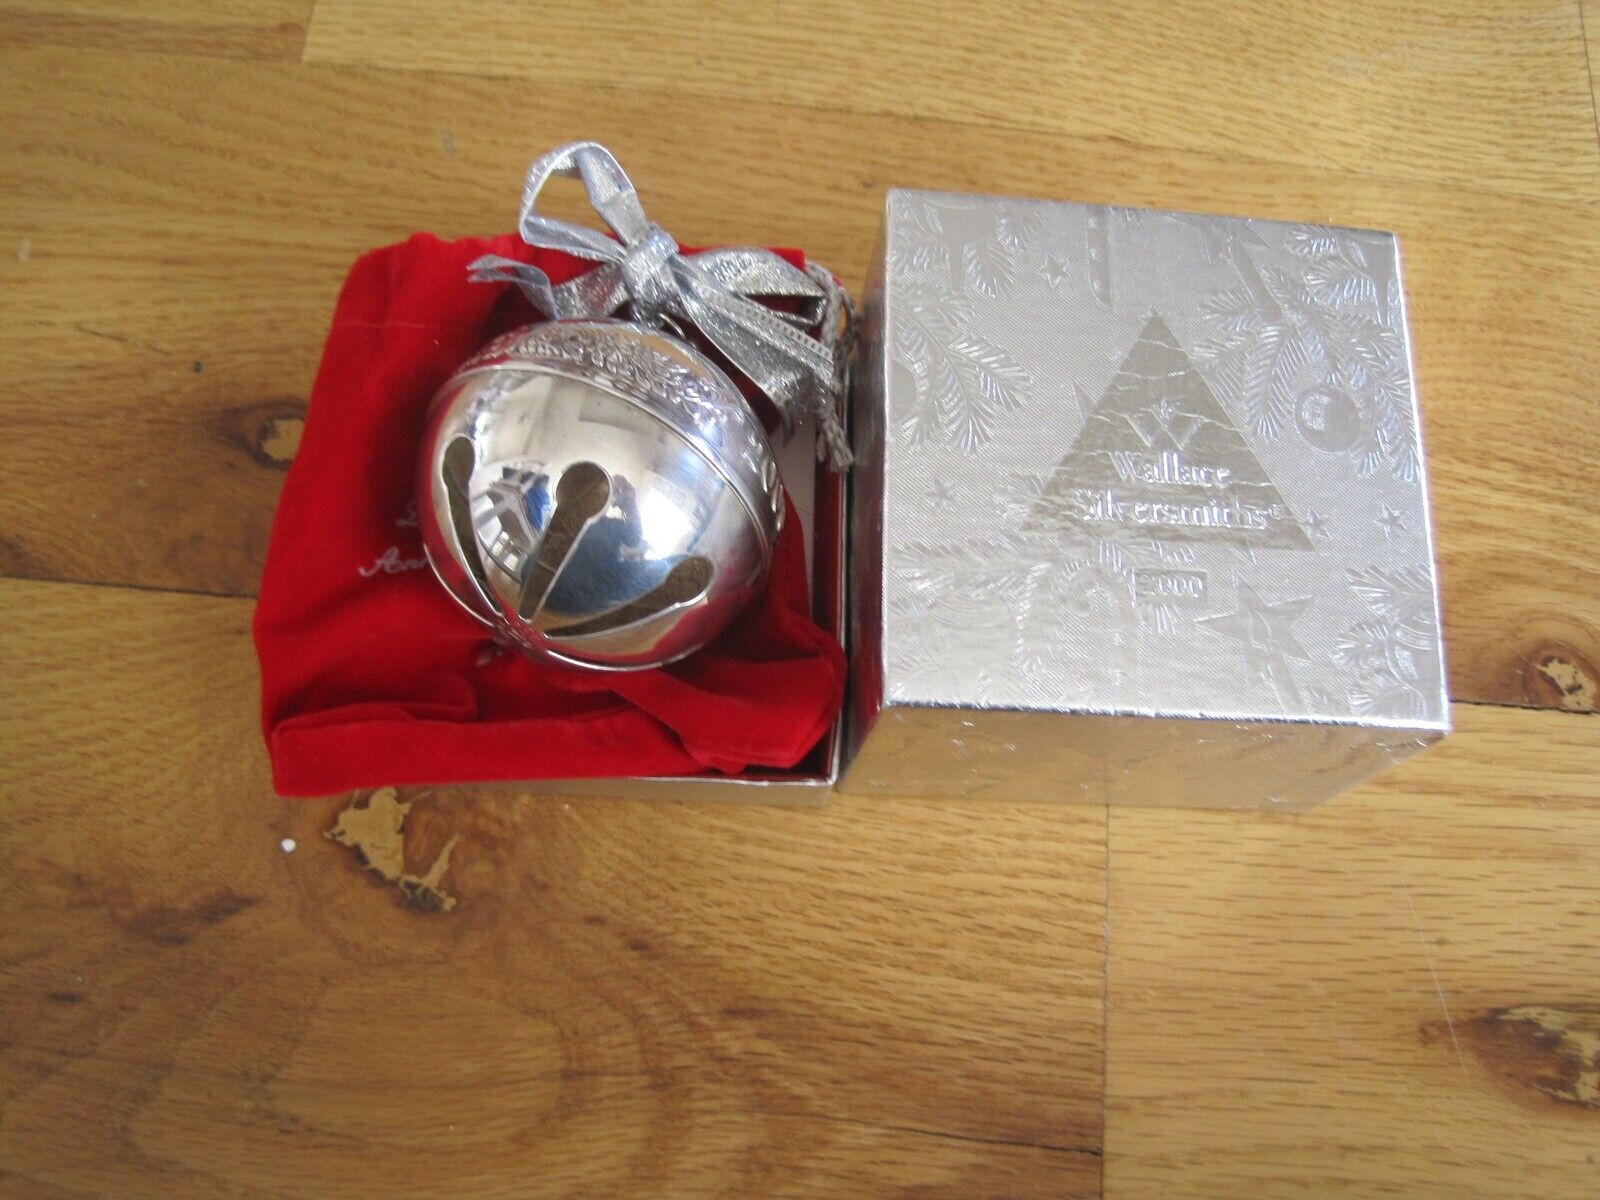 Wallace Silversmiths Anniversary Bell Ornament 2000